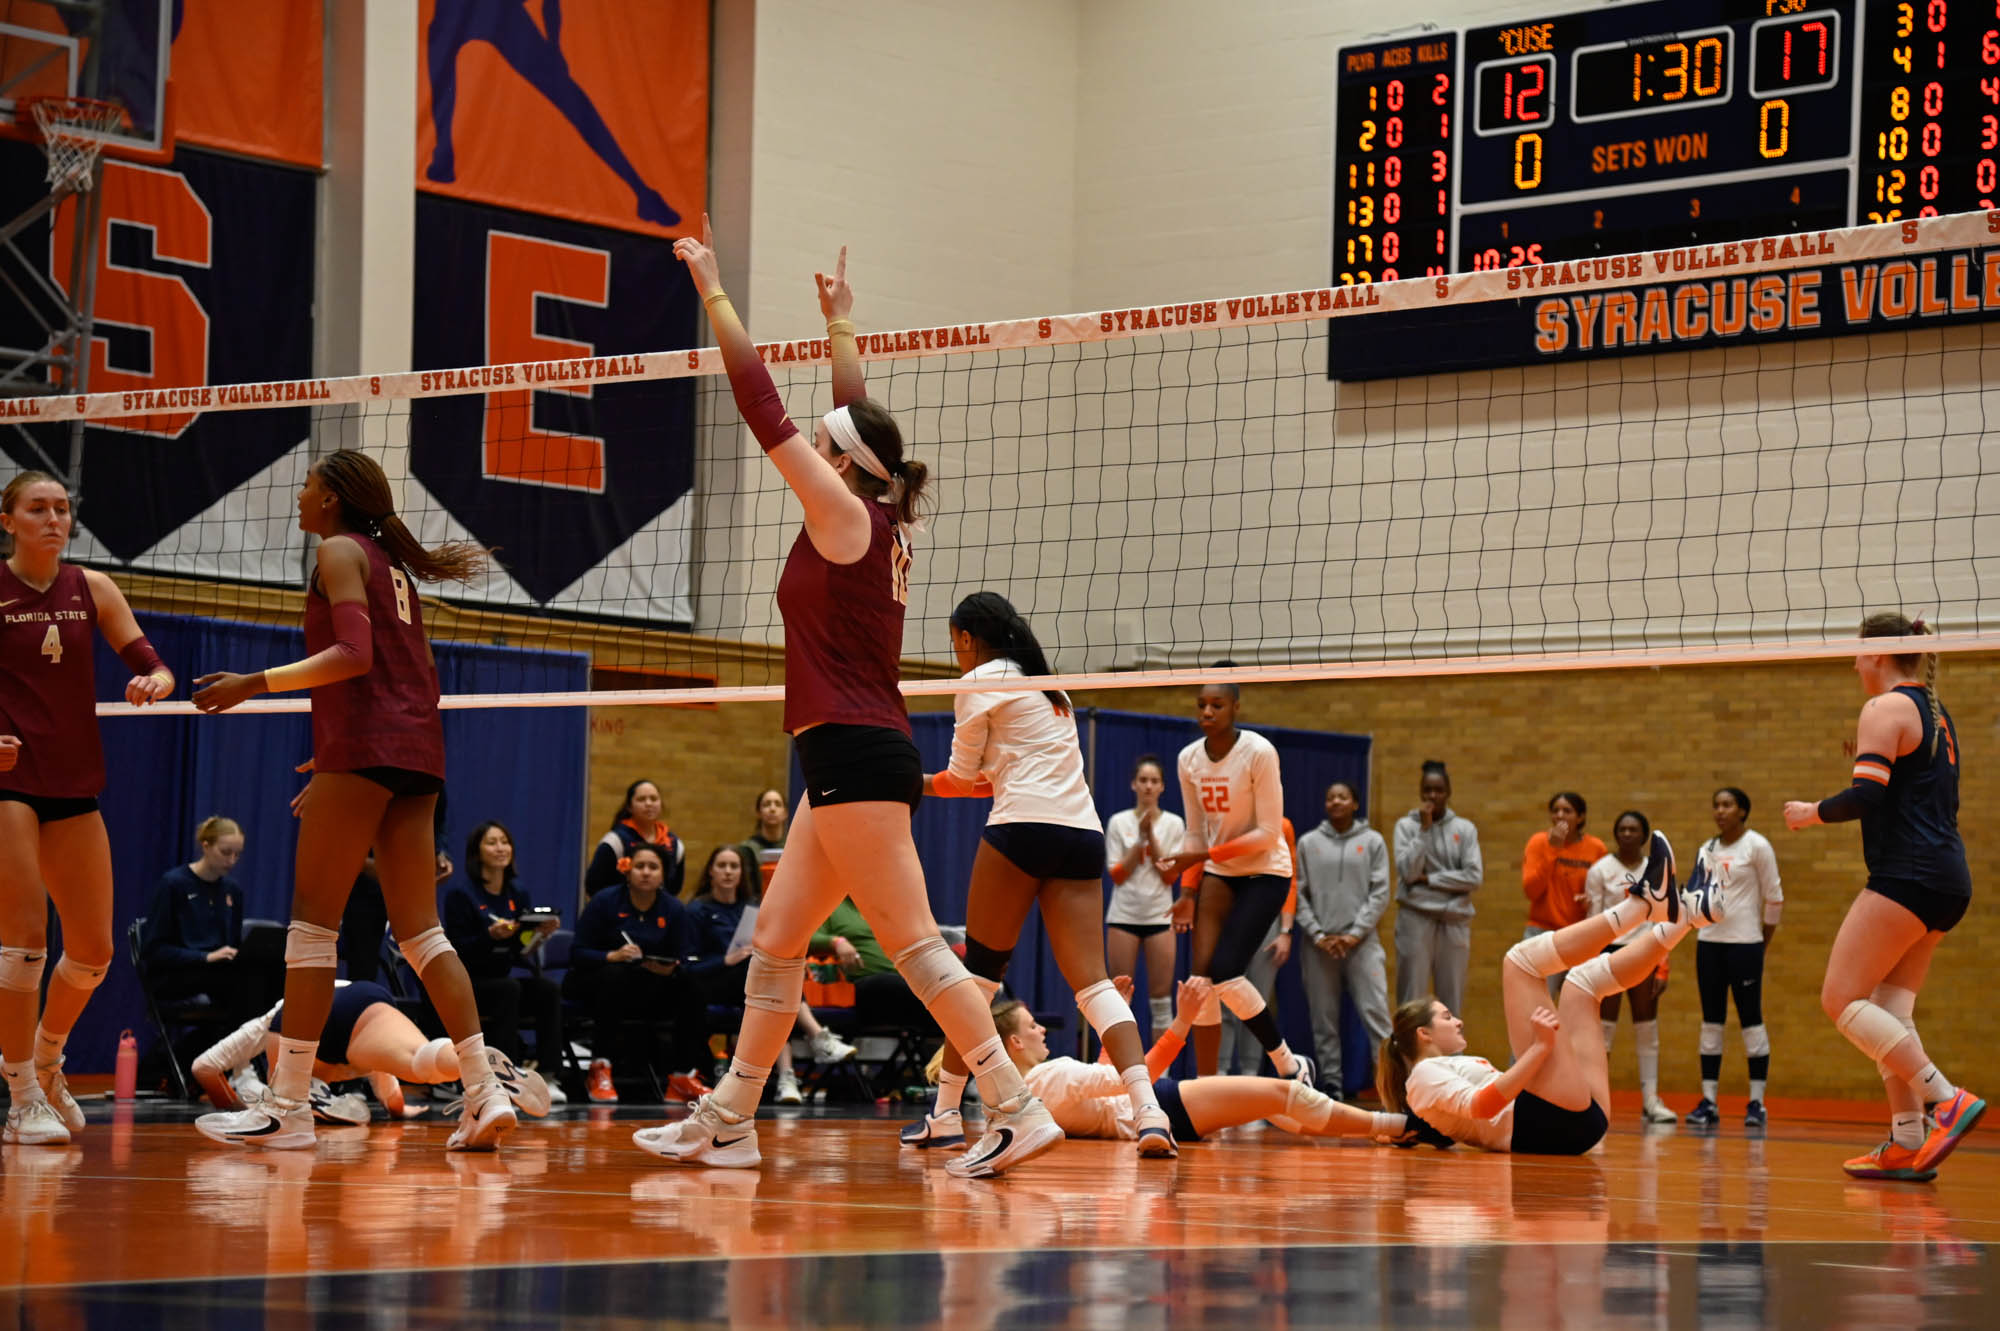 Syracuse Volleyball lost in four sets against the Florida State Seminoles, Friday November 10.